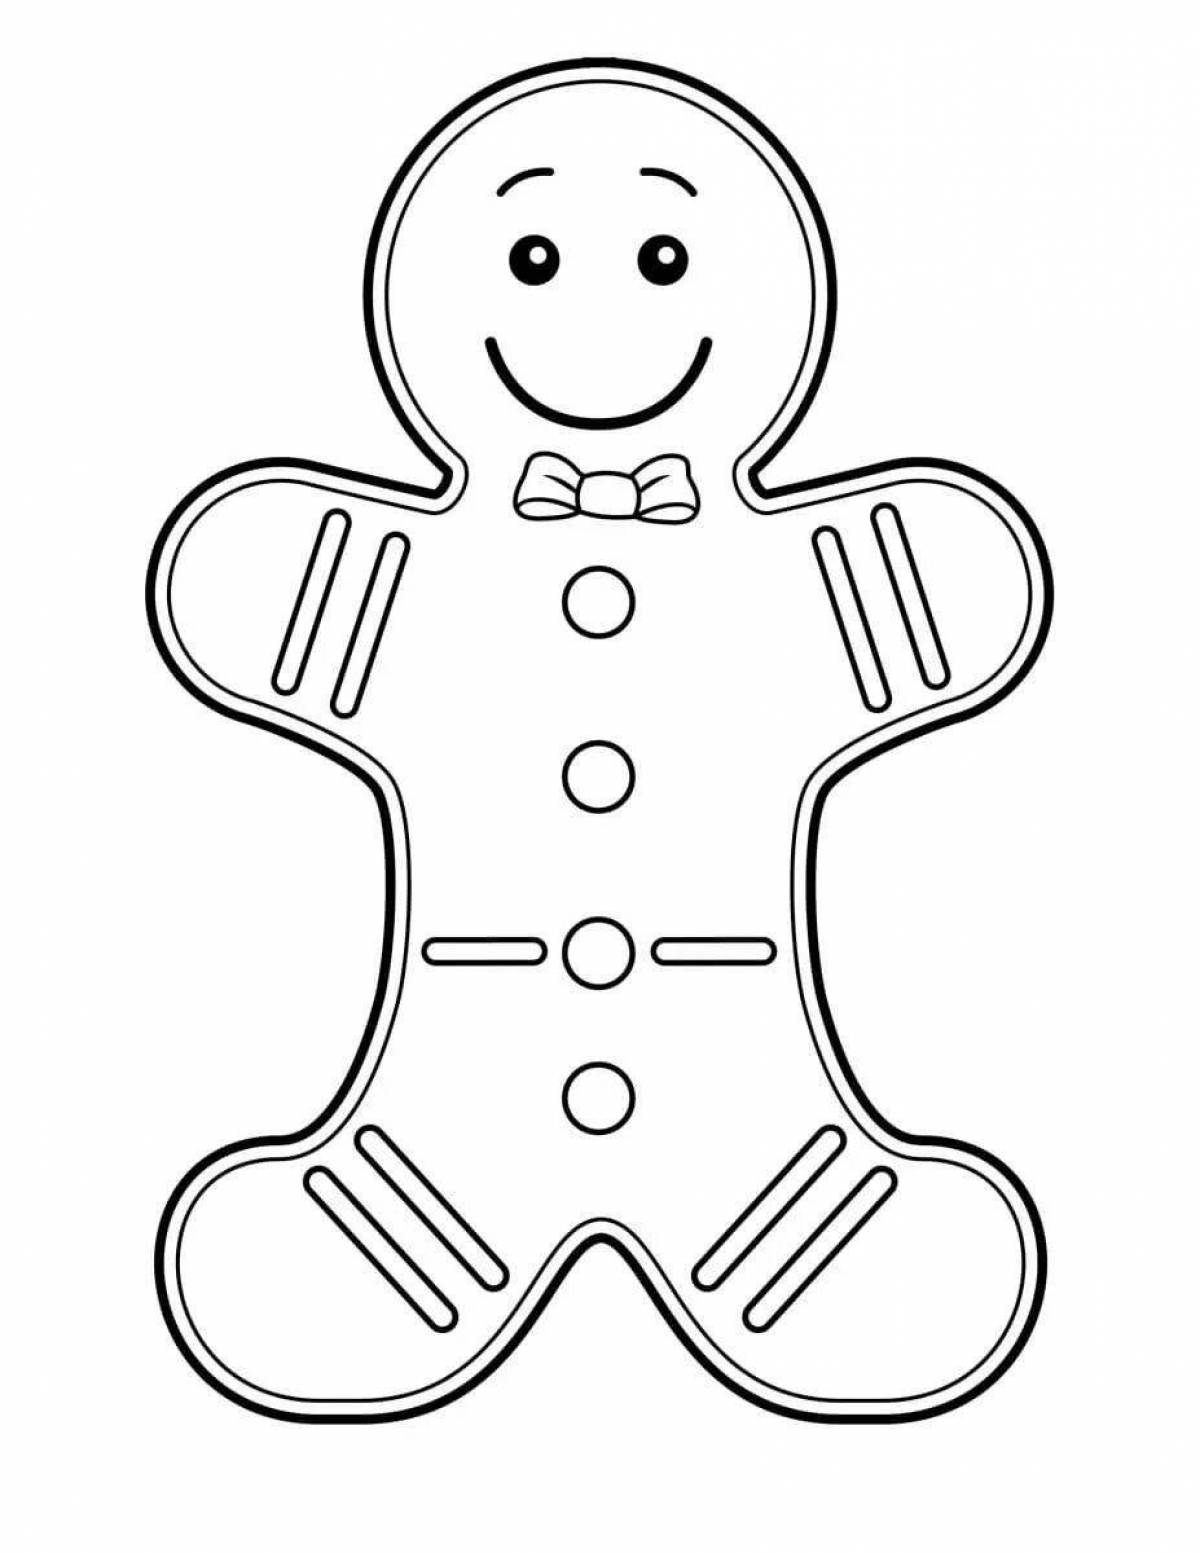 Decorative gingerbread coloring page